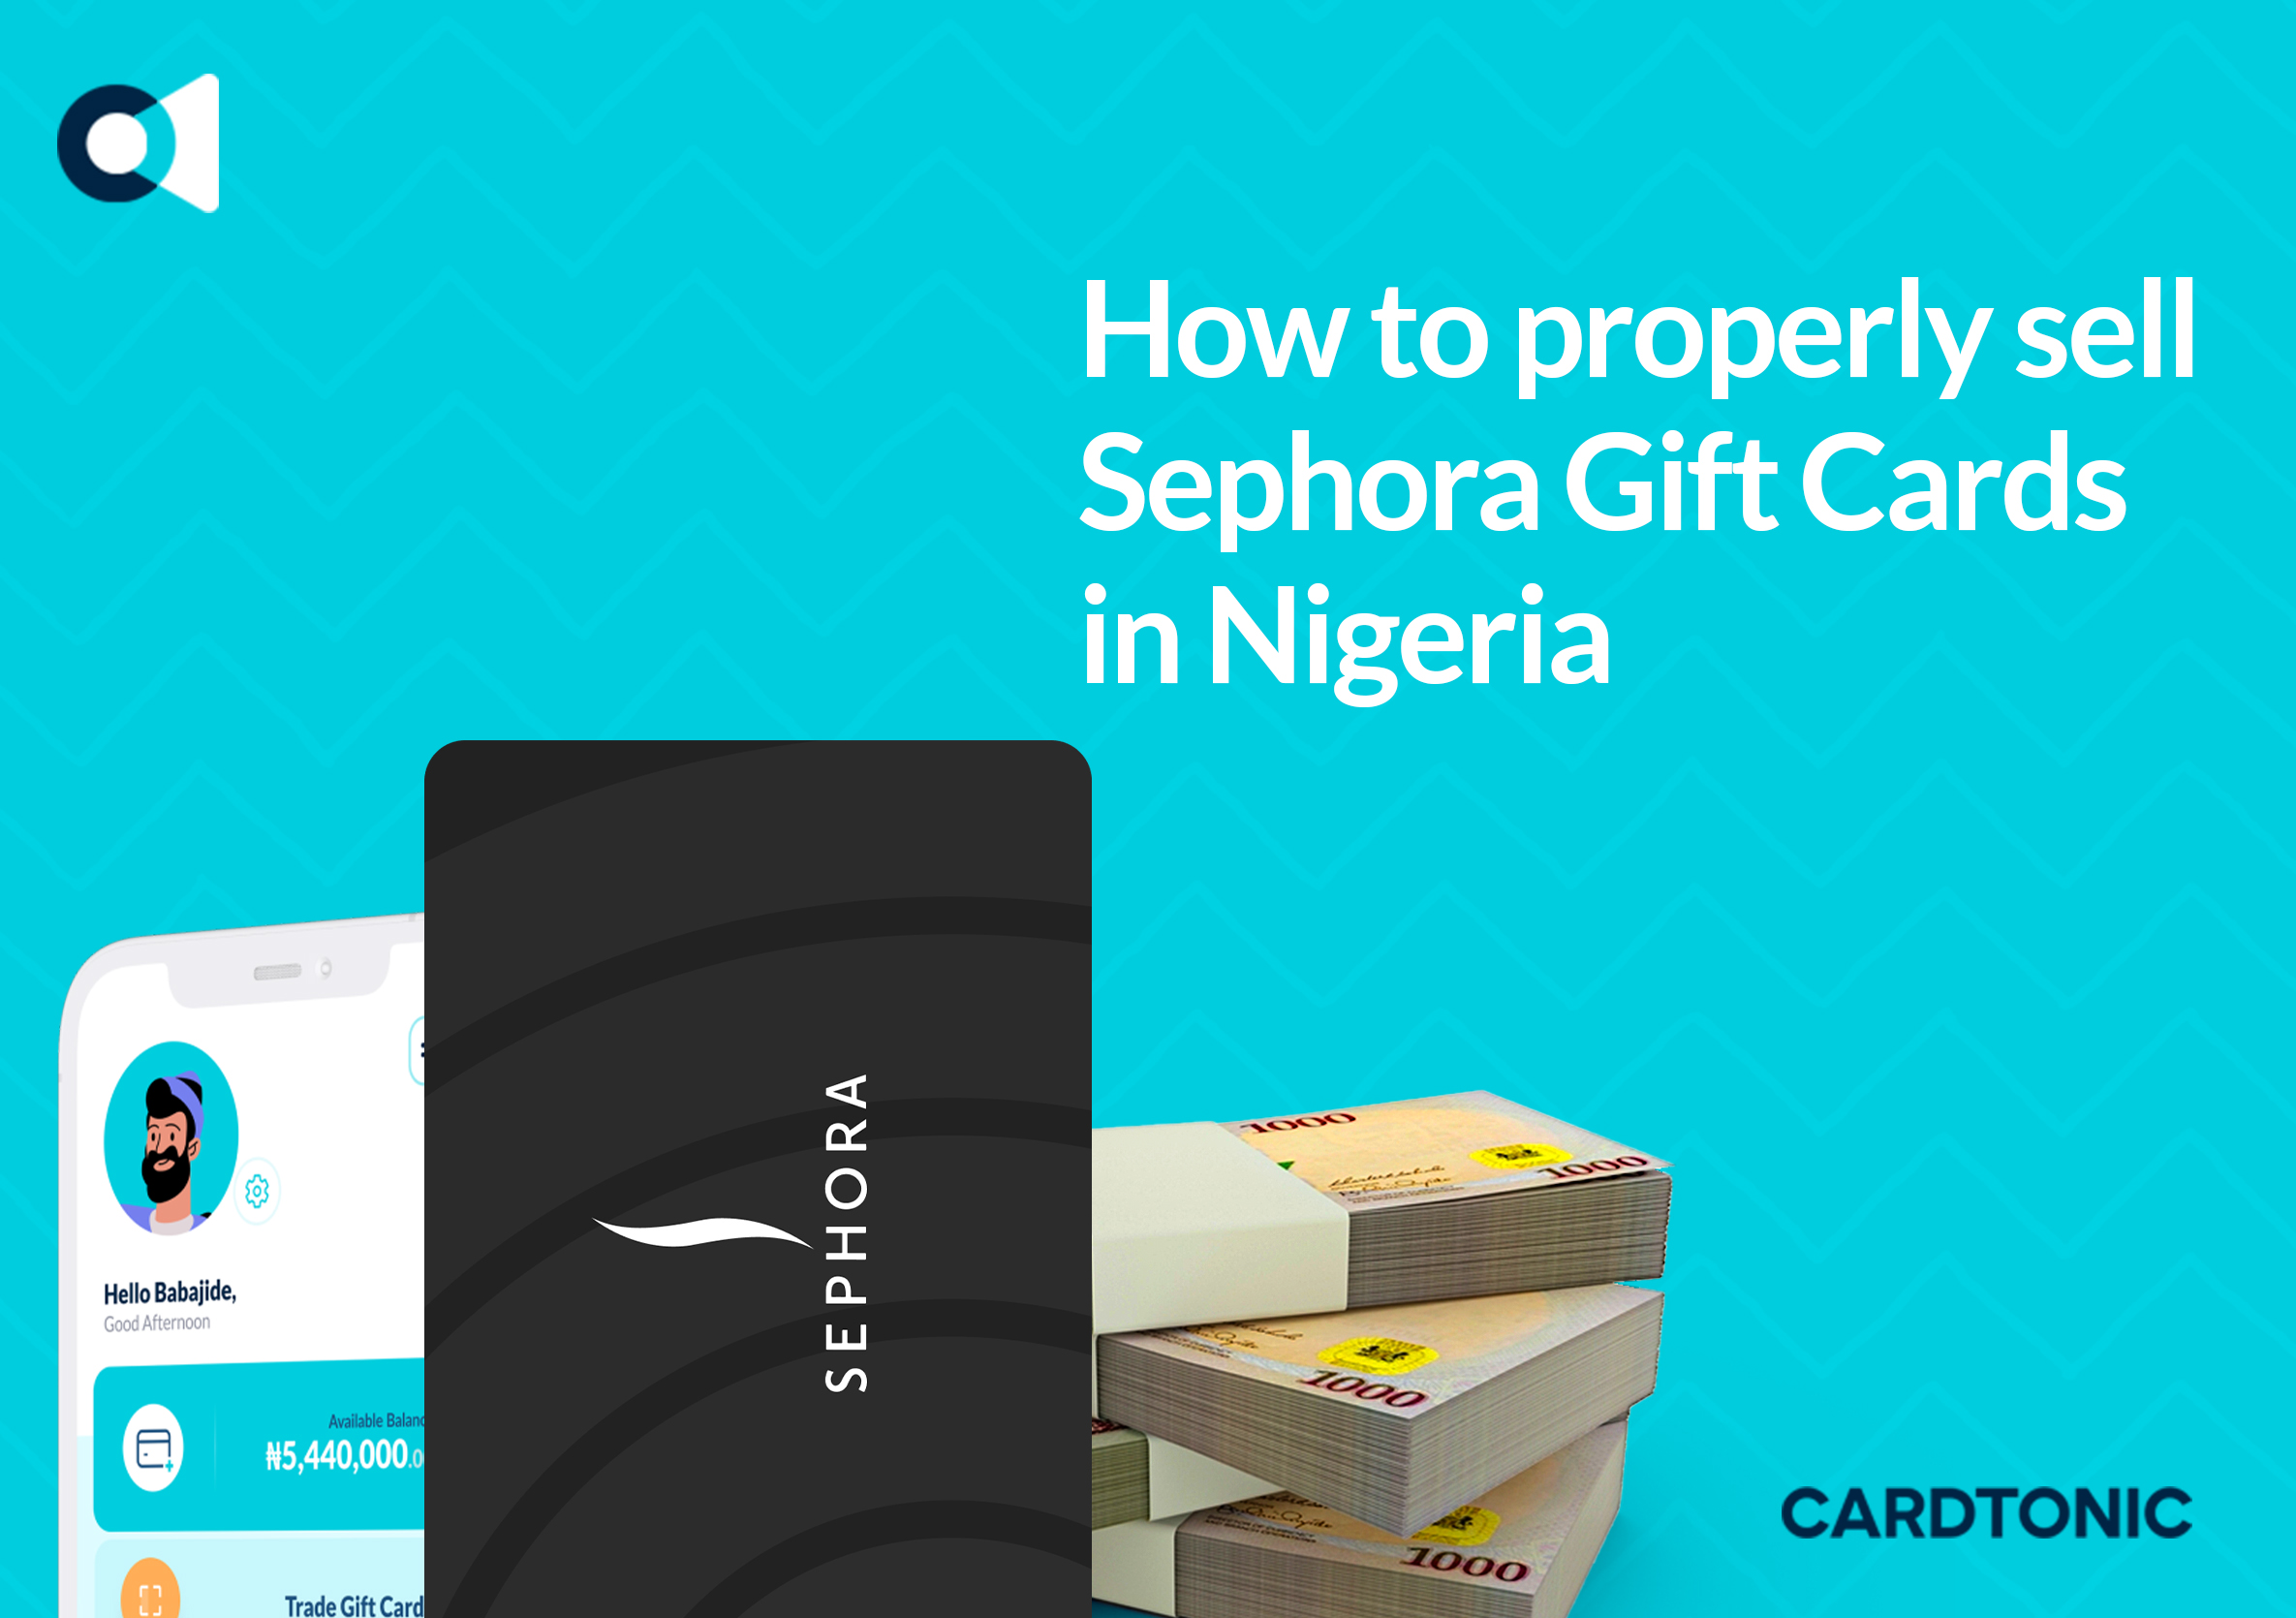 How to properly sell Sephora Gift Cards in Nigeria